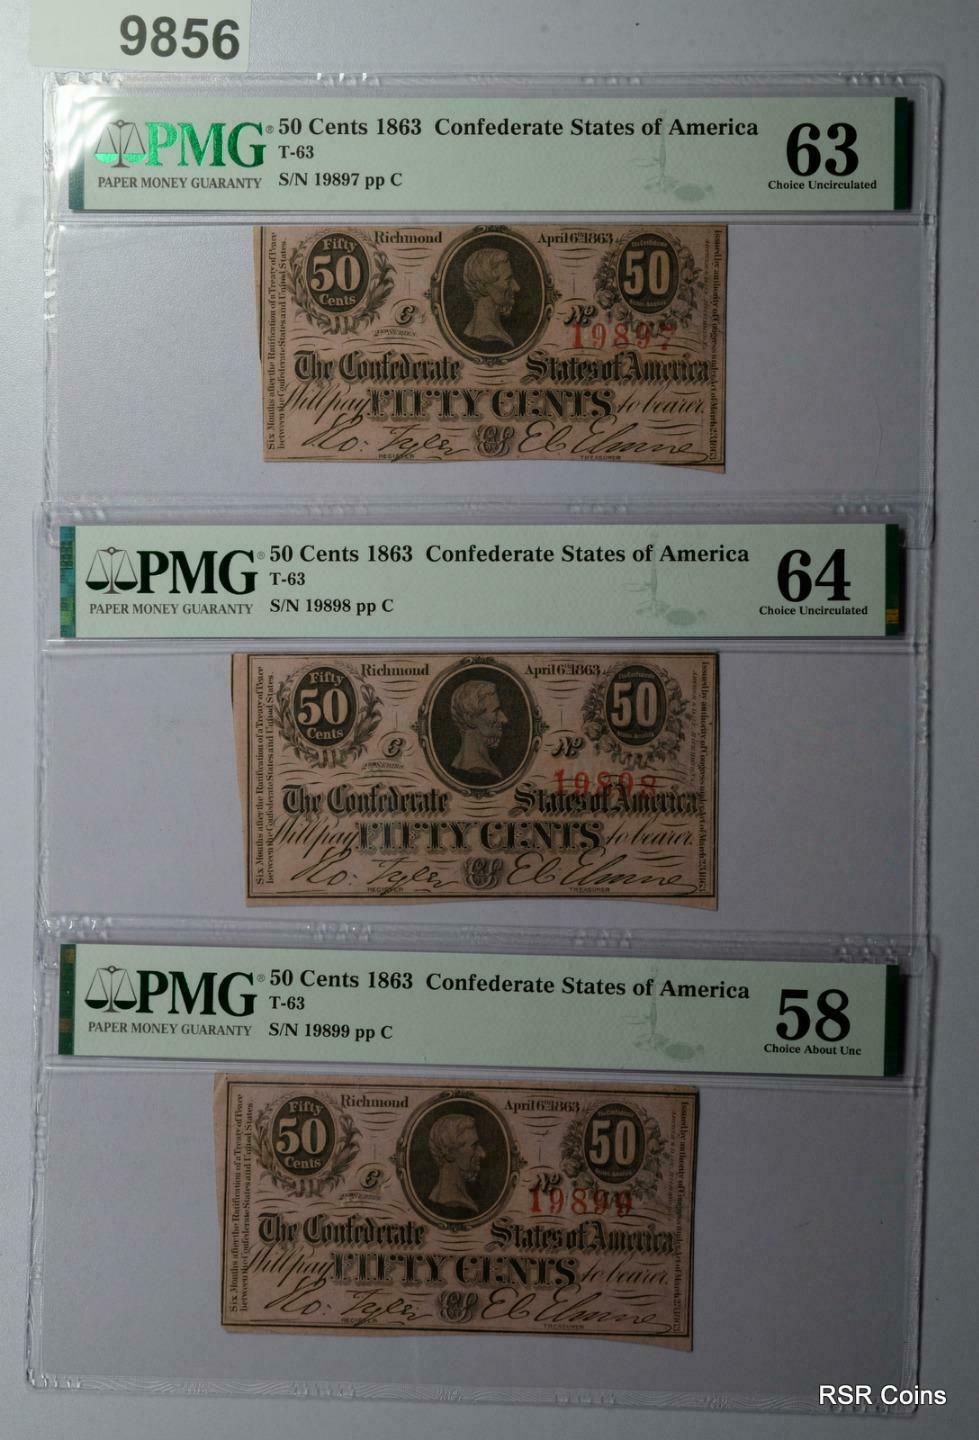 1863 CONFEDERATE STATES OF AMERICA 50 CENTS PMG CERTIFIED 10 CONSEC NOTES! #9856